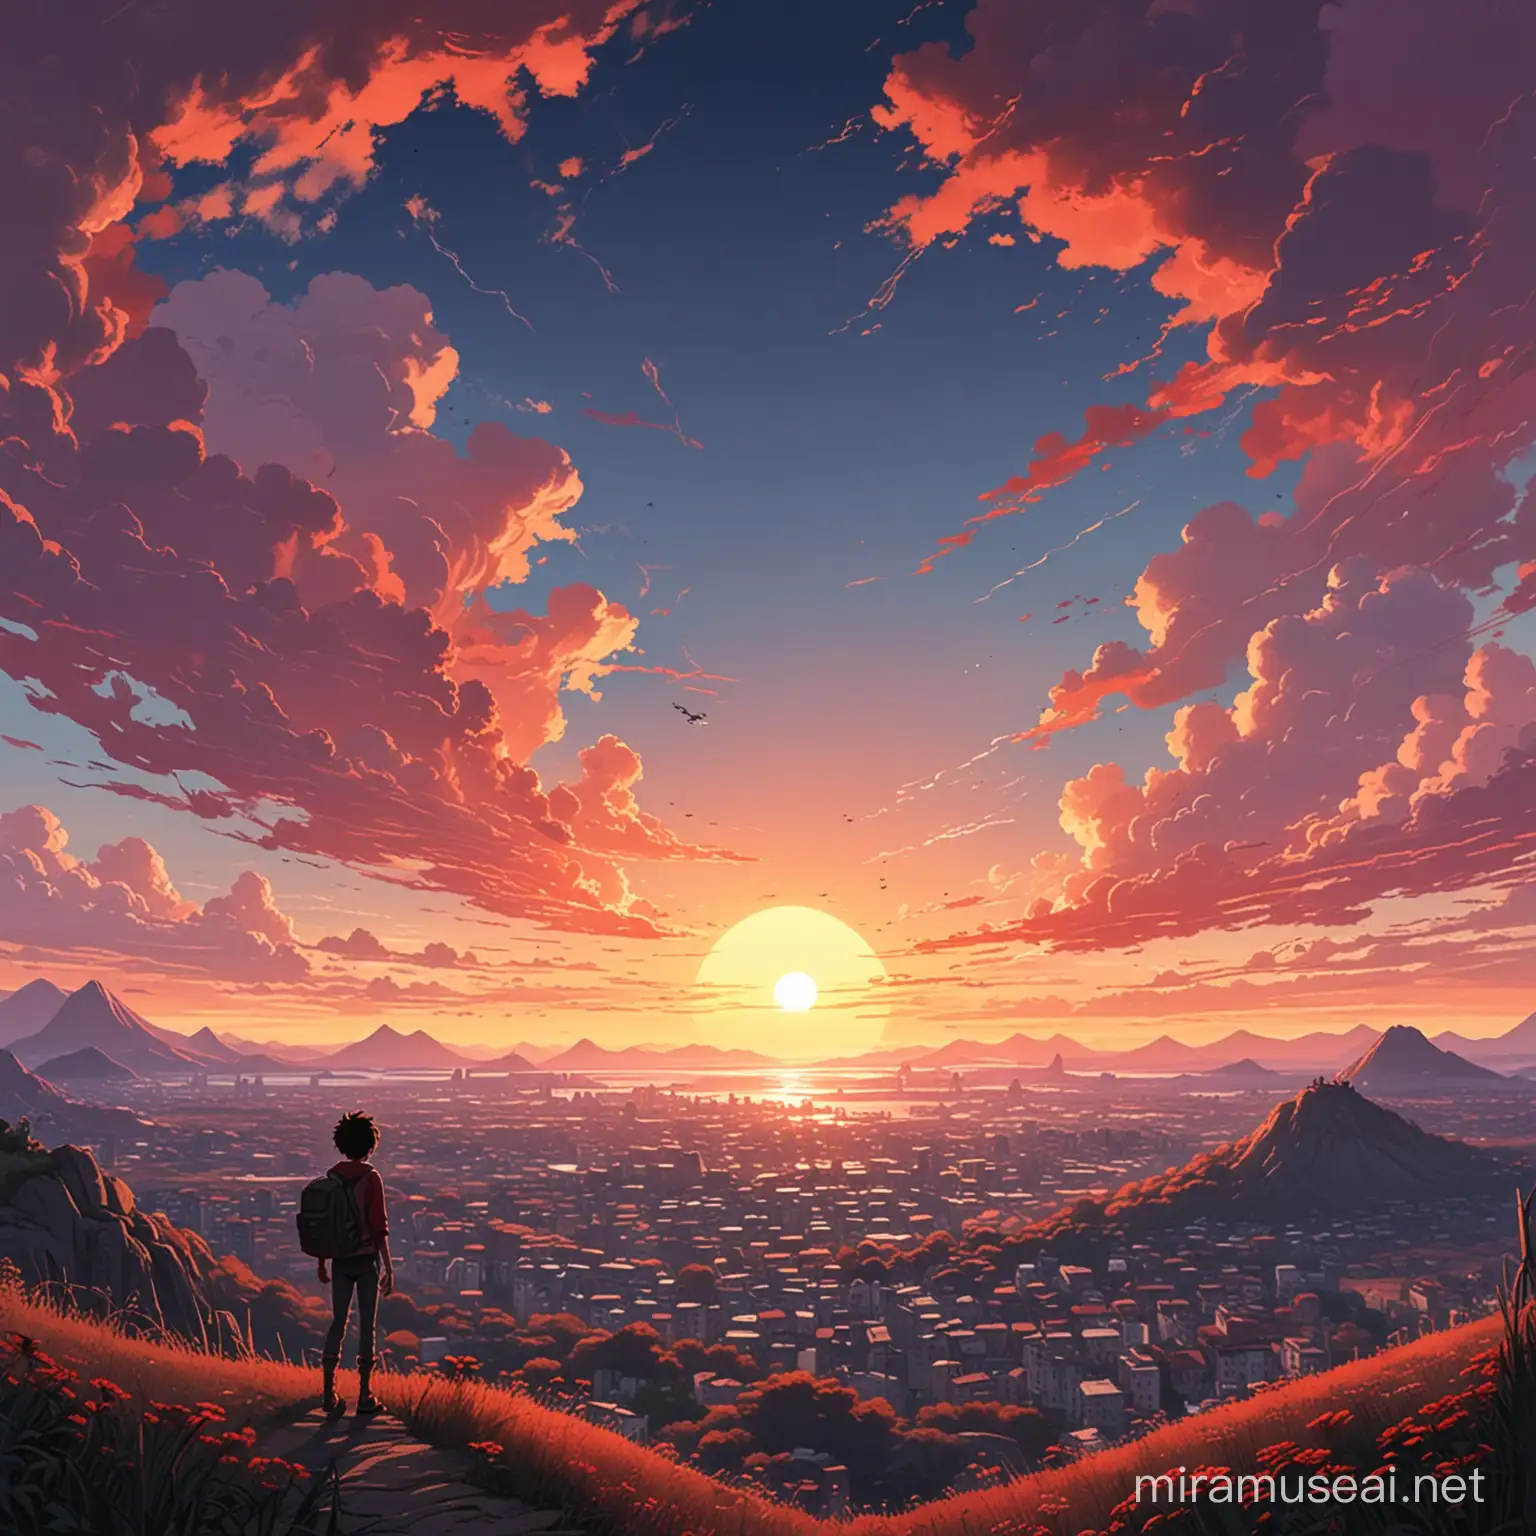 Ghibli Sunset Sky with Clouds in Spiderverse Comic Style